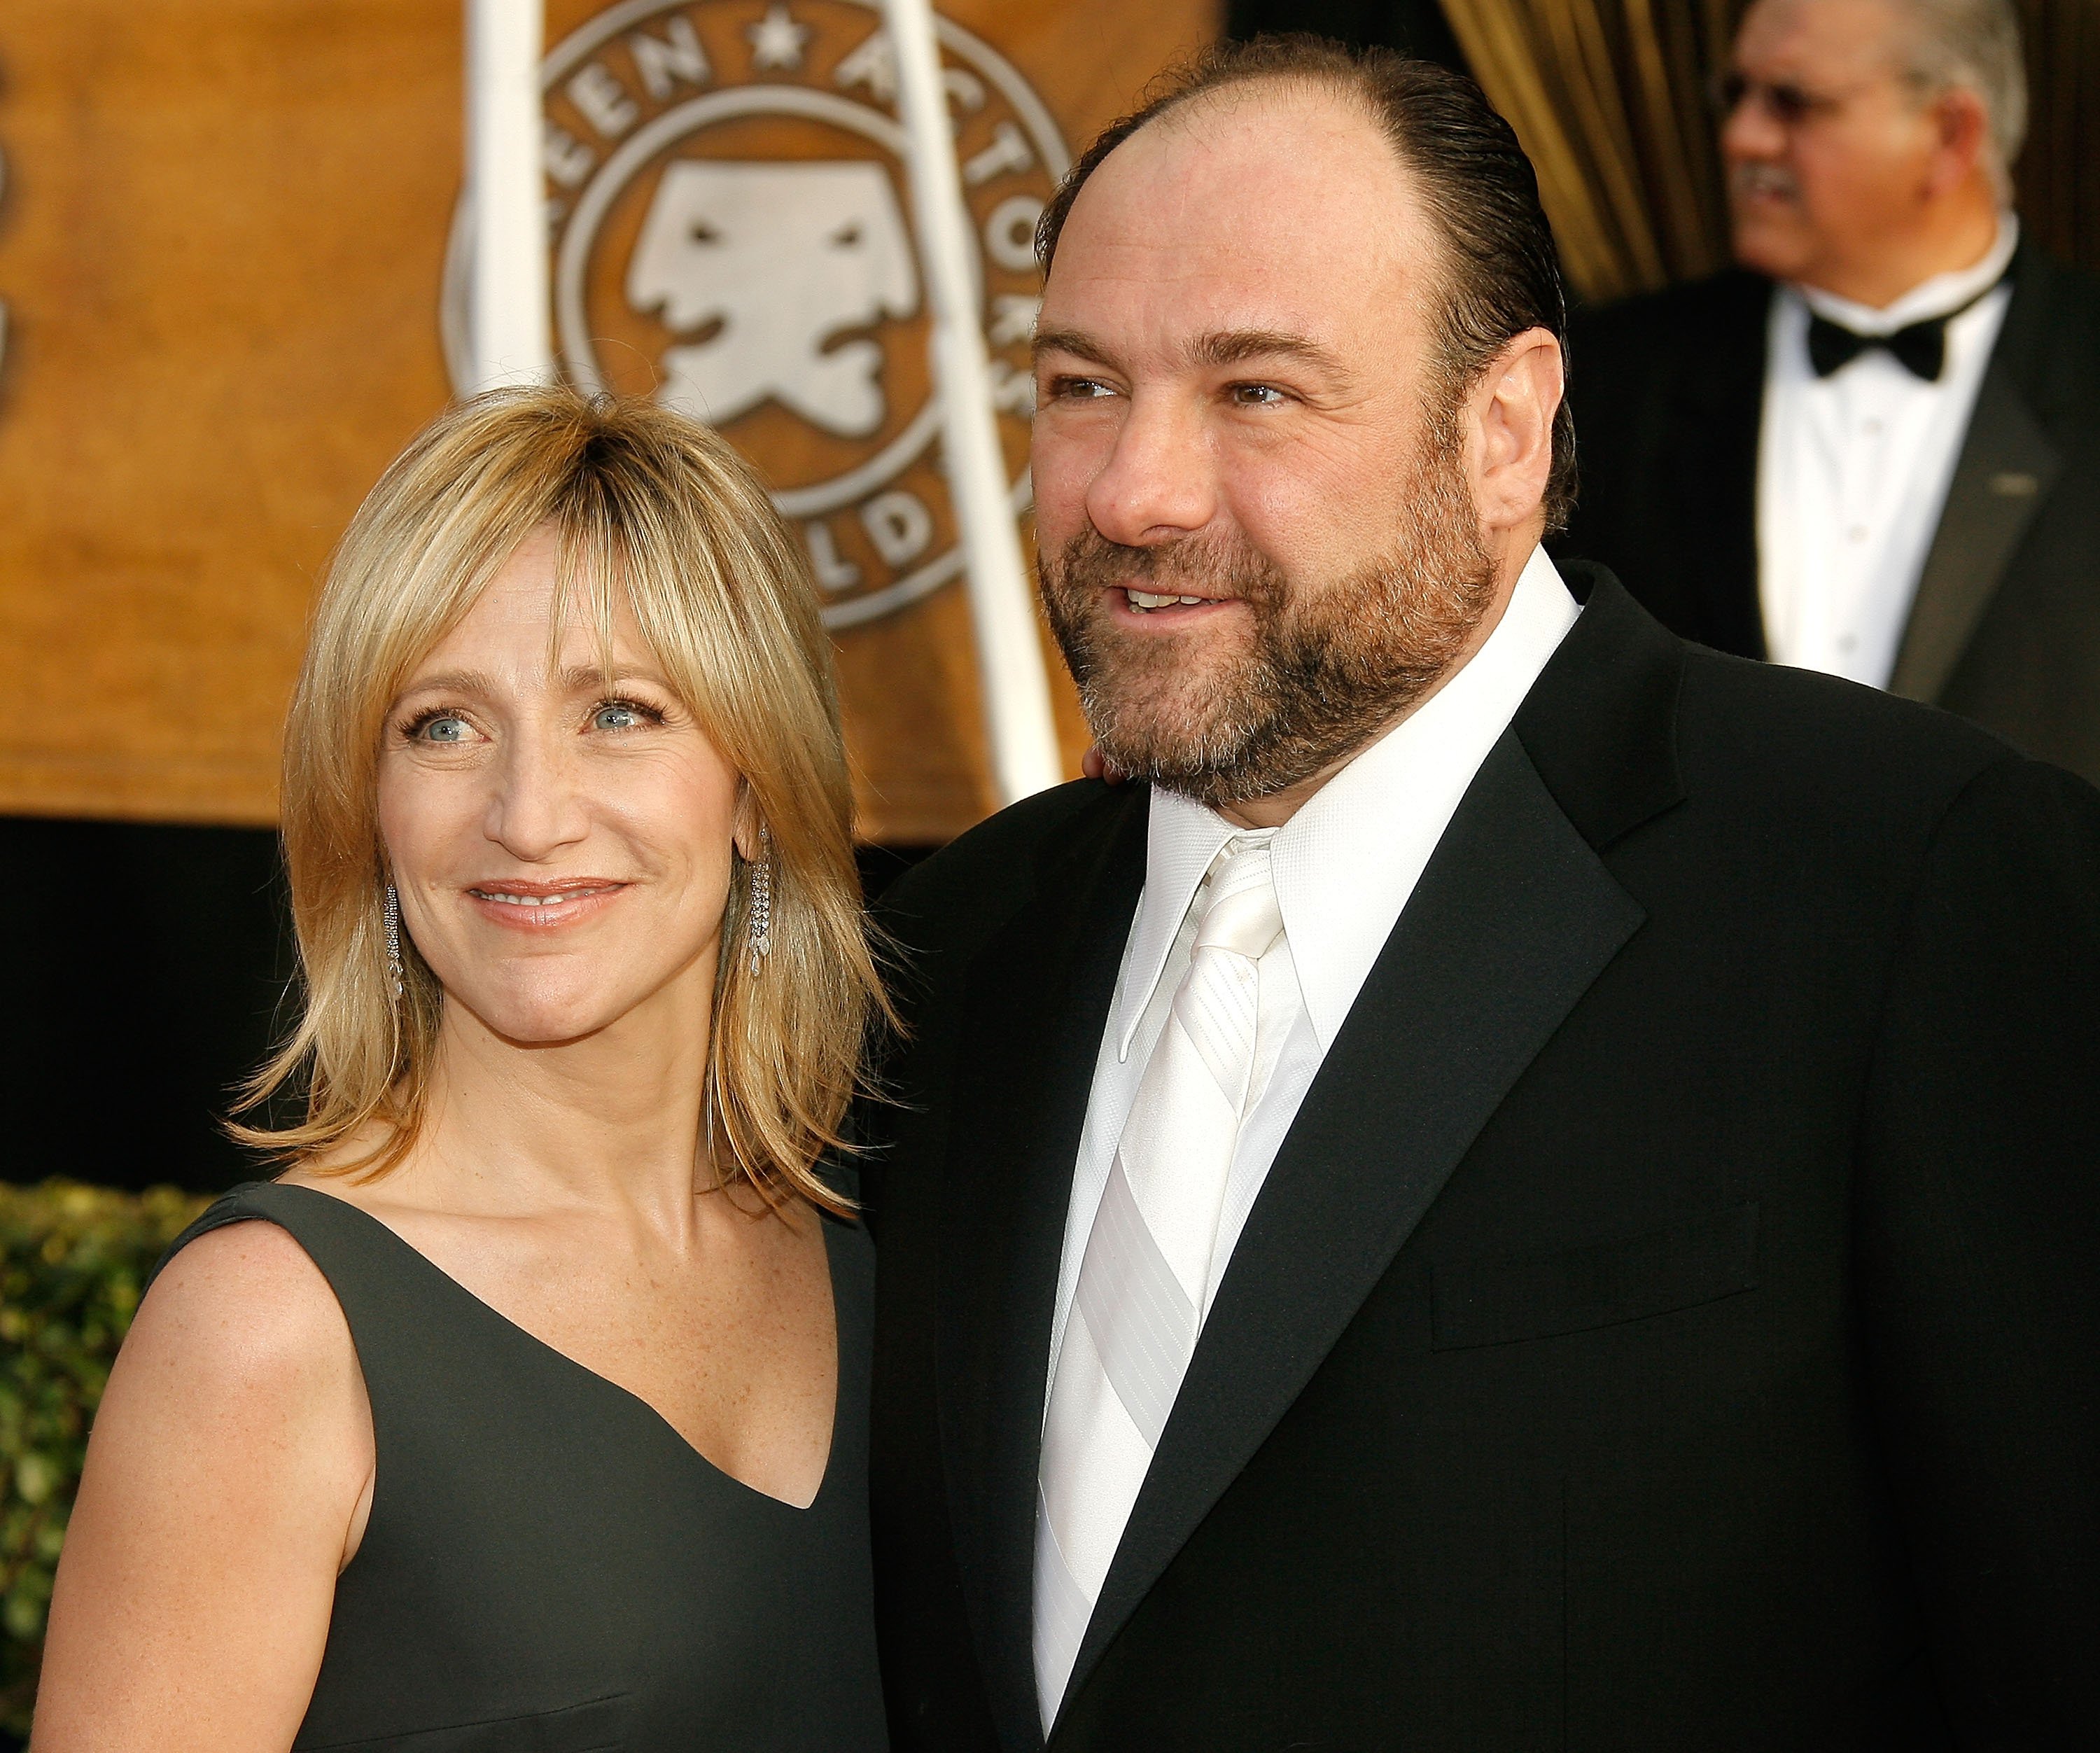 Edie Falco and James Gandolfini at the 14th annual Screen Actors Guild awards hosted at the Shrine Auditorium in Los Angeles, CA, on January 27, 2008. | Source: Getty Images